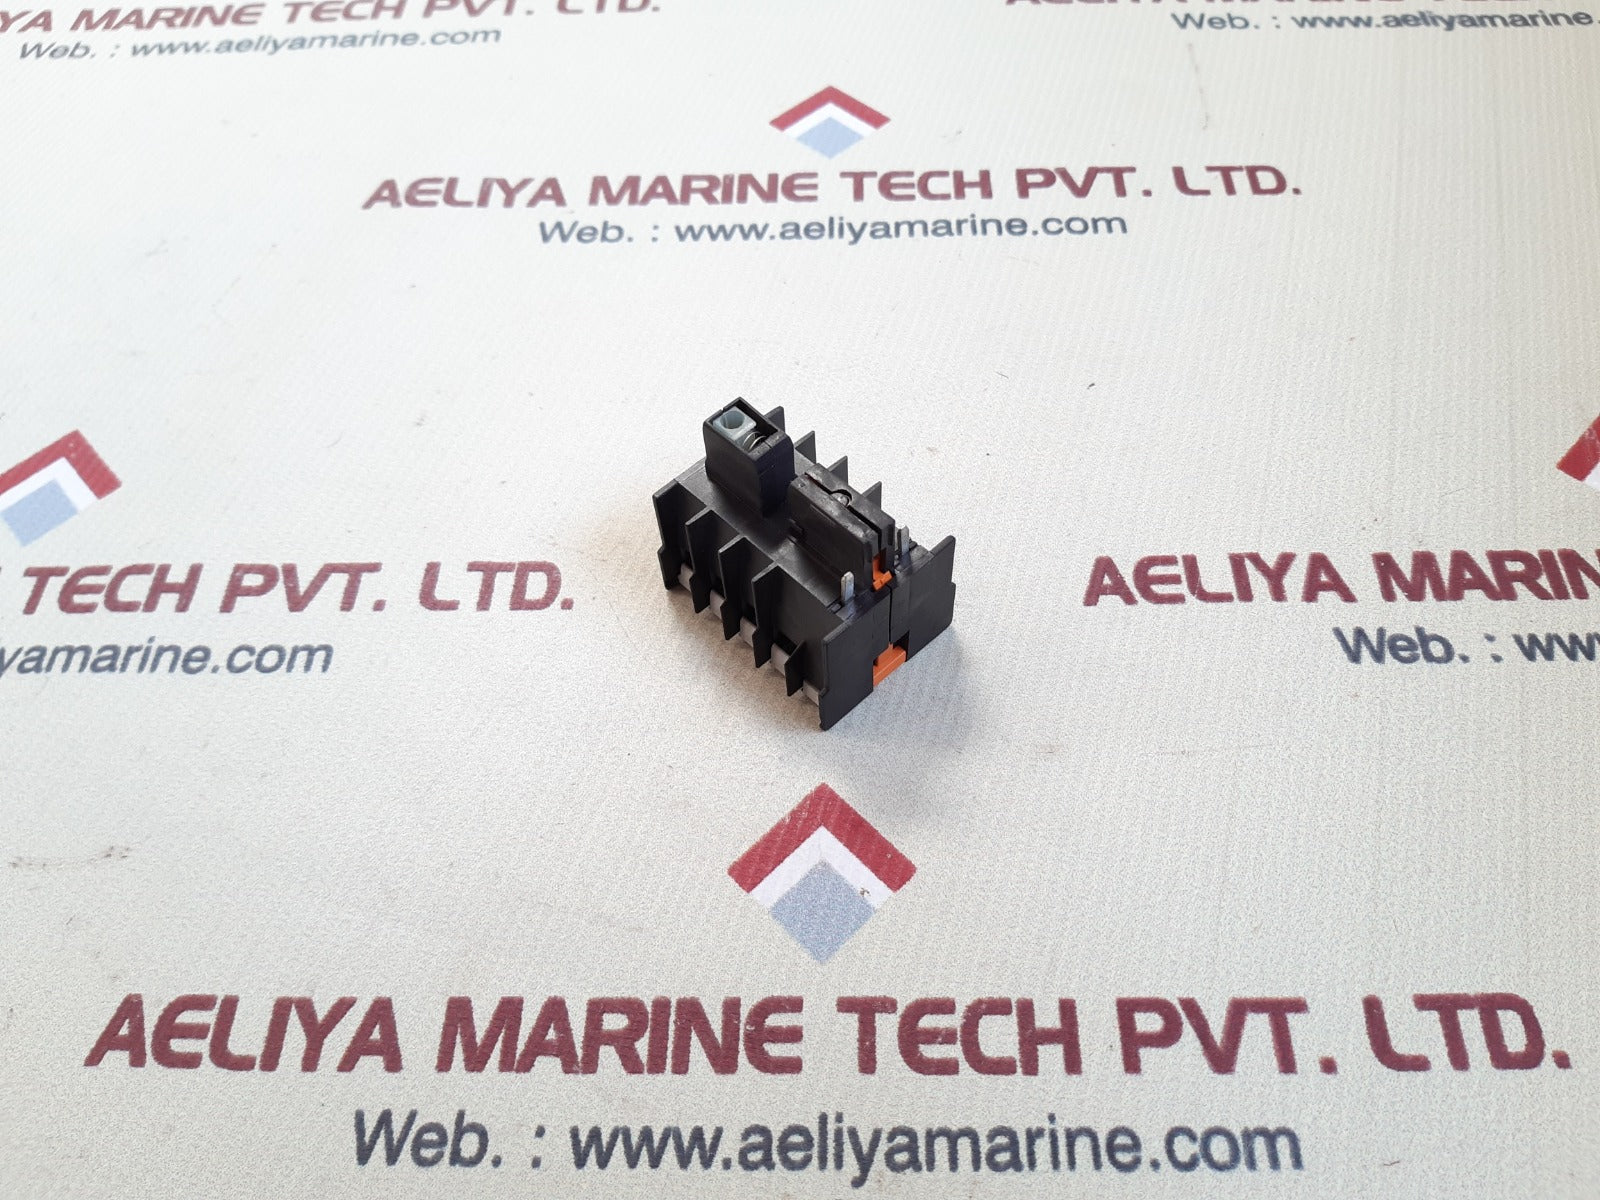 Siemens 3tx4411-2a auxiliary contact block